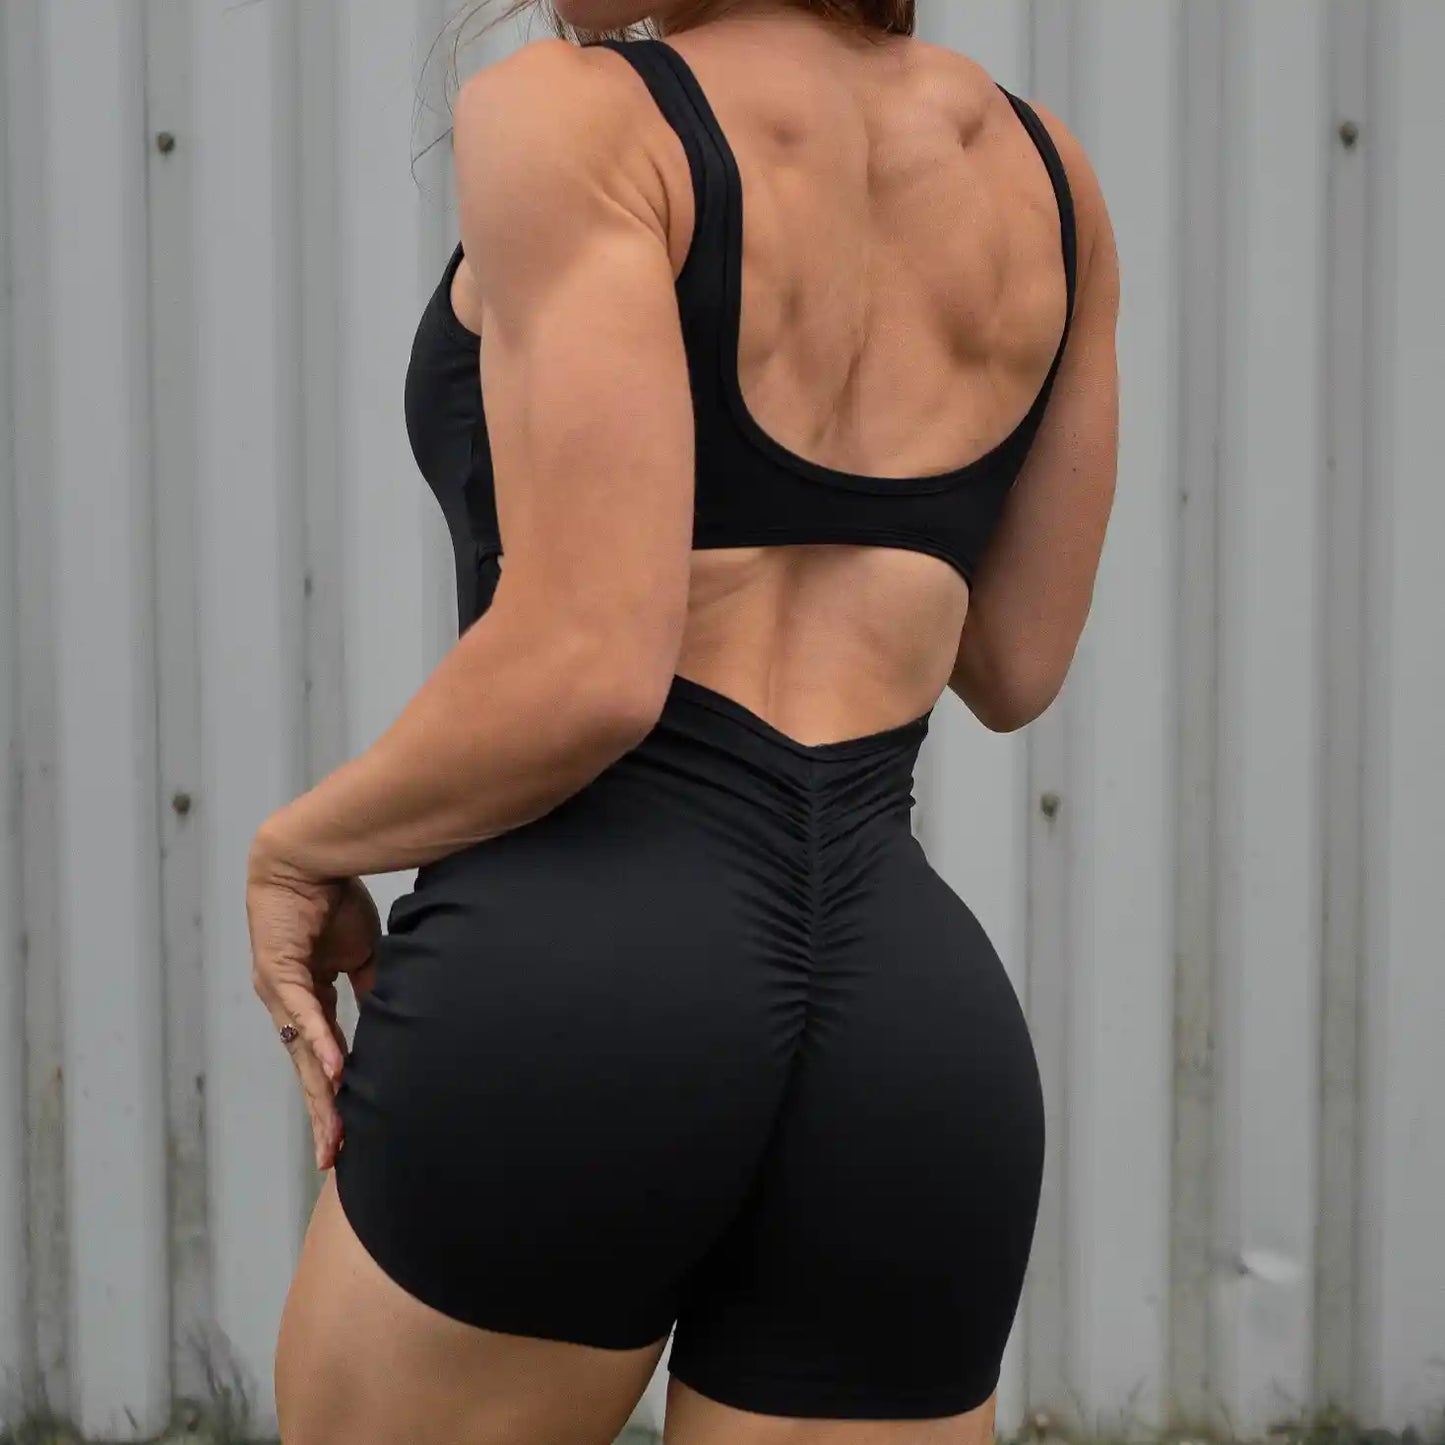 Dioa Fitness Apparel - Fitness One Piece